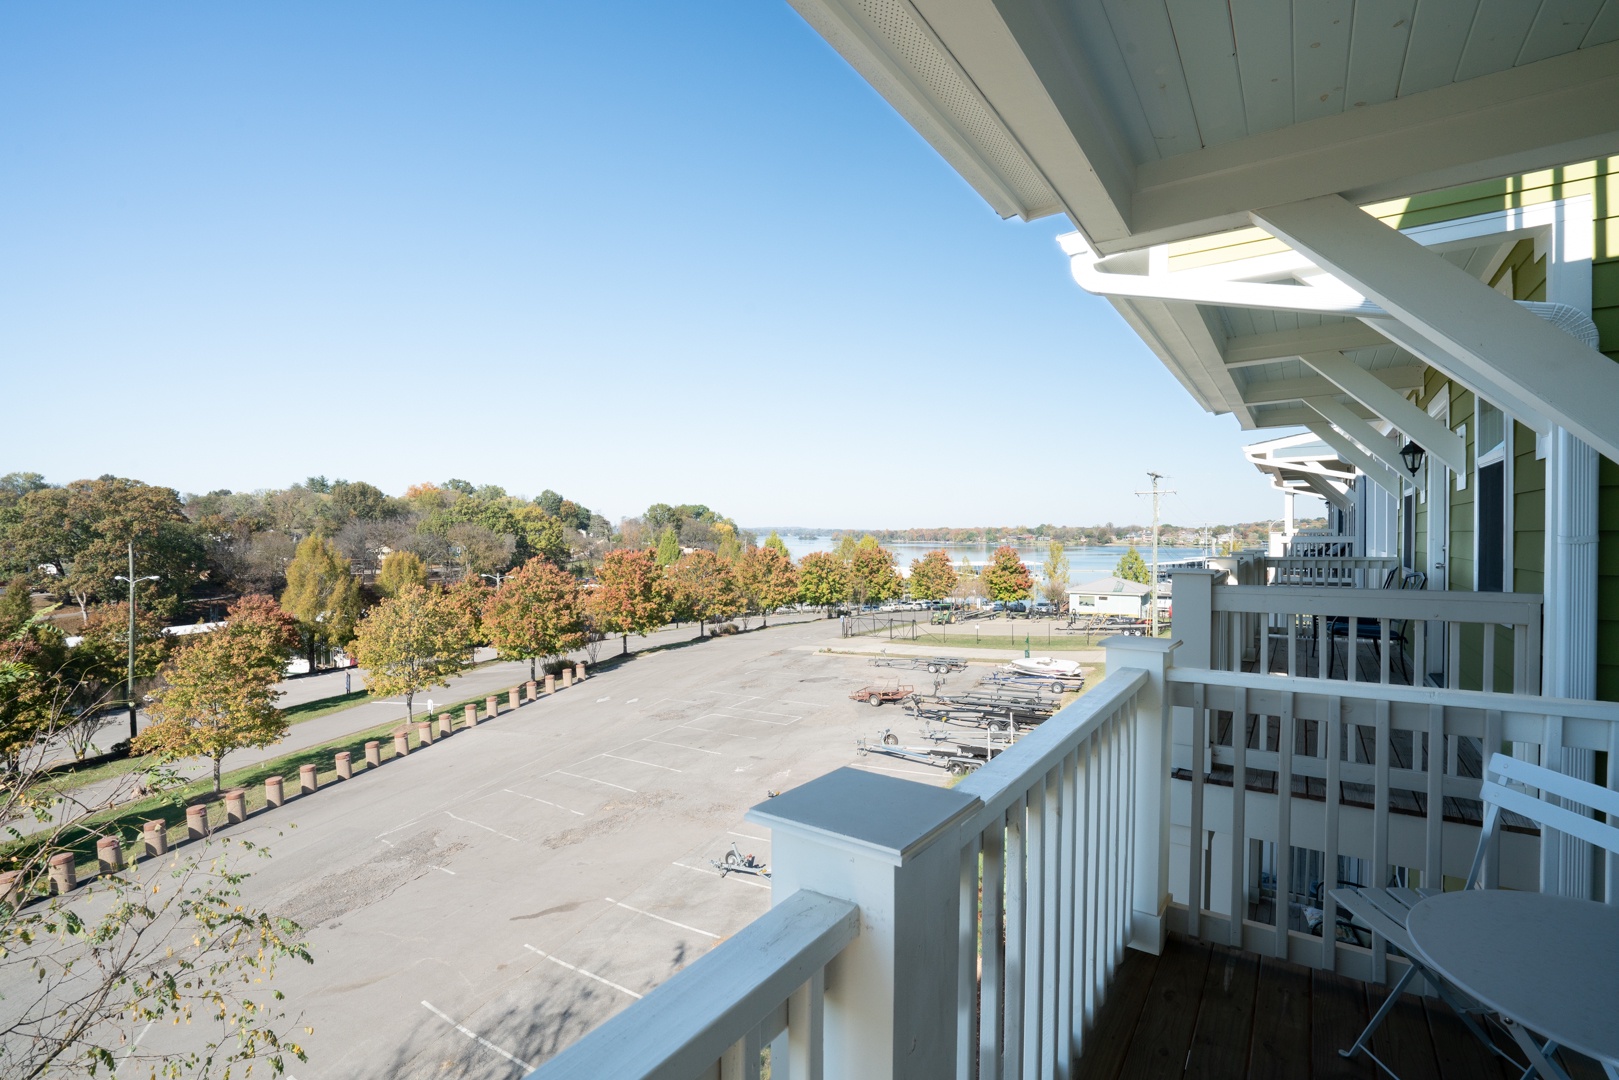 Take in the gorgeous views from the 3rd floor balcony